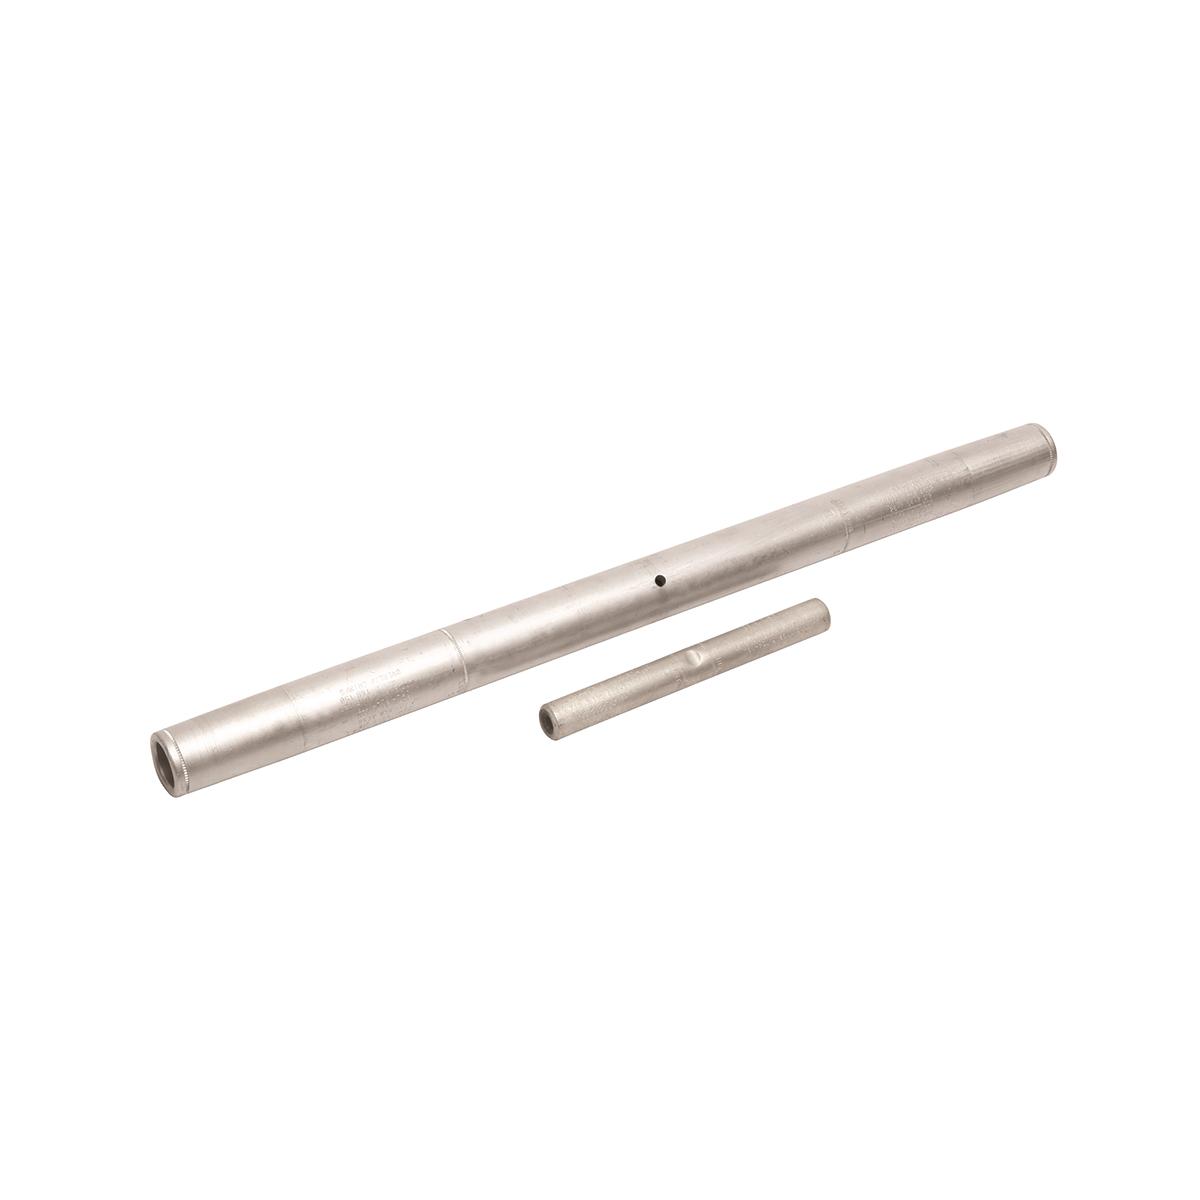 Hubbell YTS49R Aluminum Sleeve, 1033.5 - 1113 Kcmil ACSR, 230 V, 29.02" L, 727 Index, Included in Full Tension Splice. 